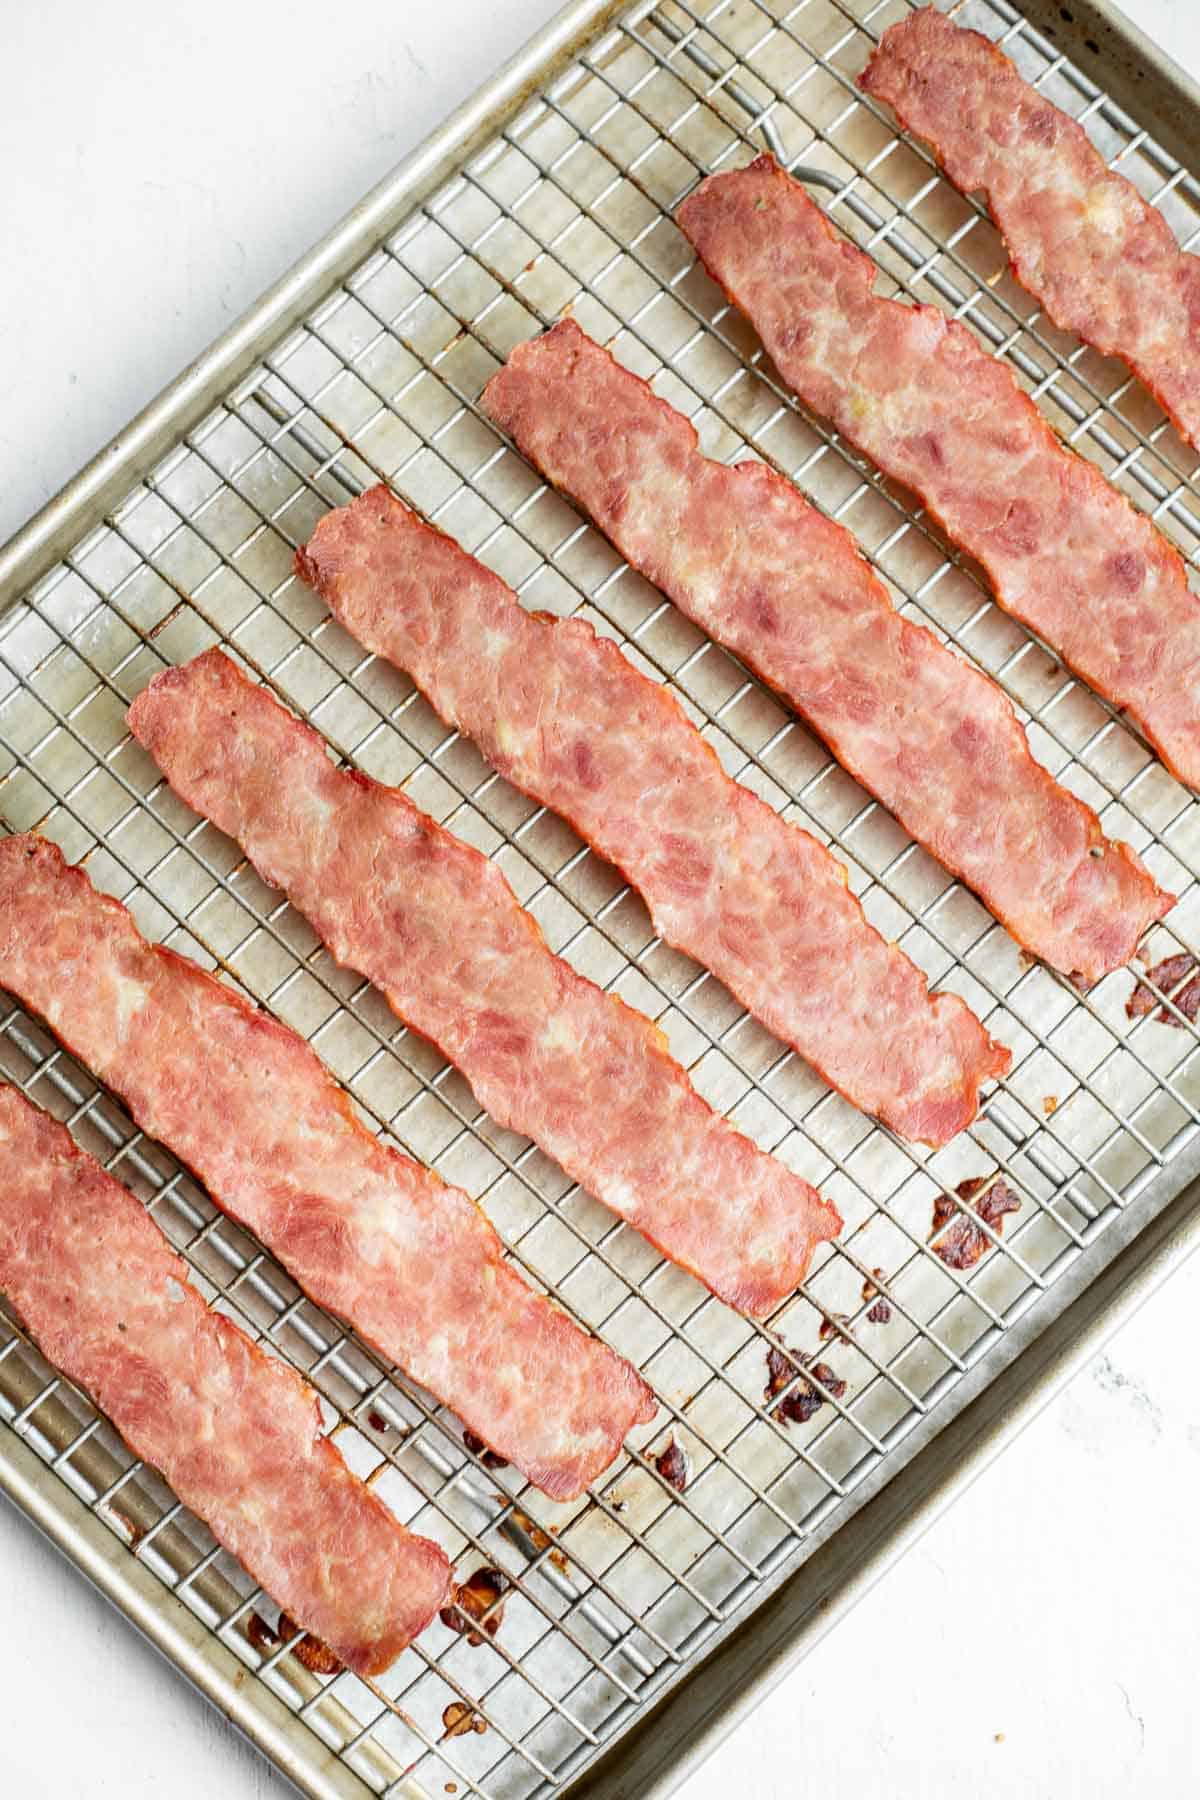 oven baked turkey bacon on baking sheet with wire rack.